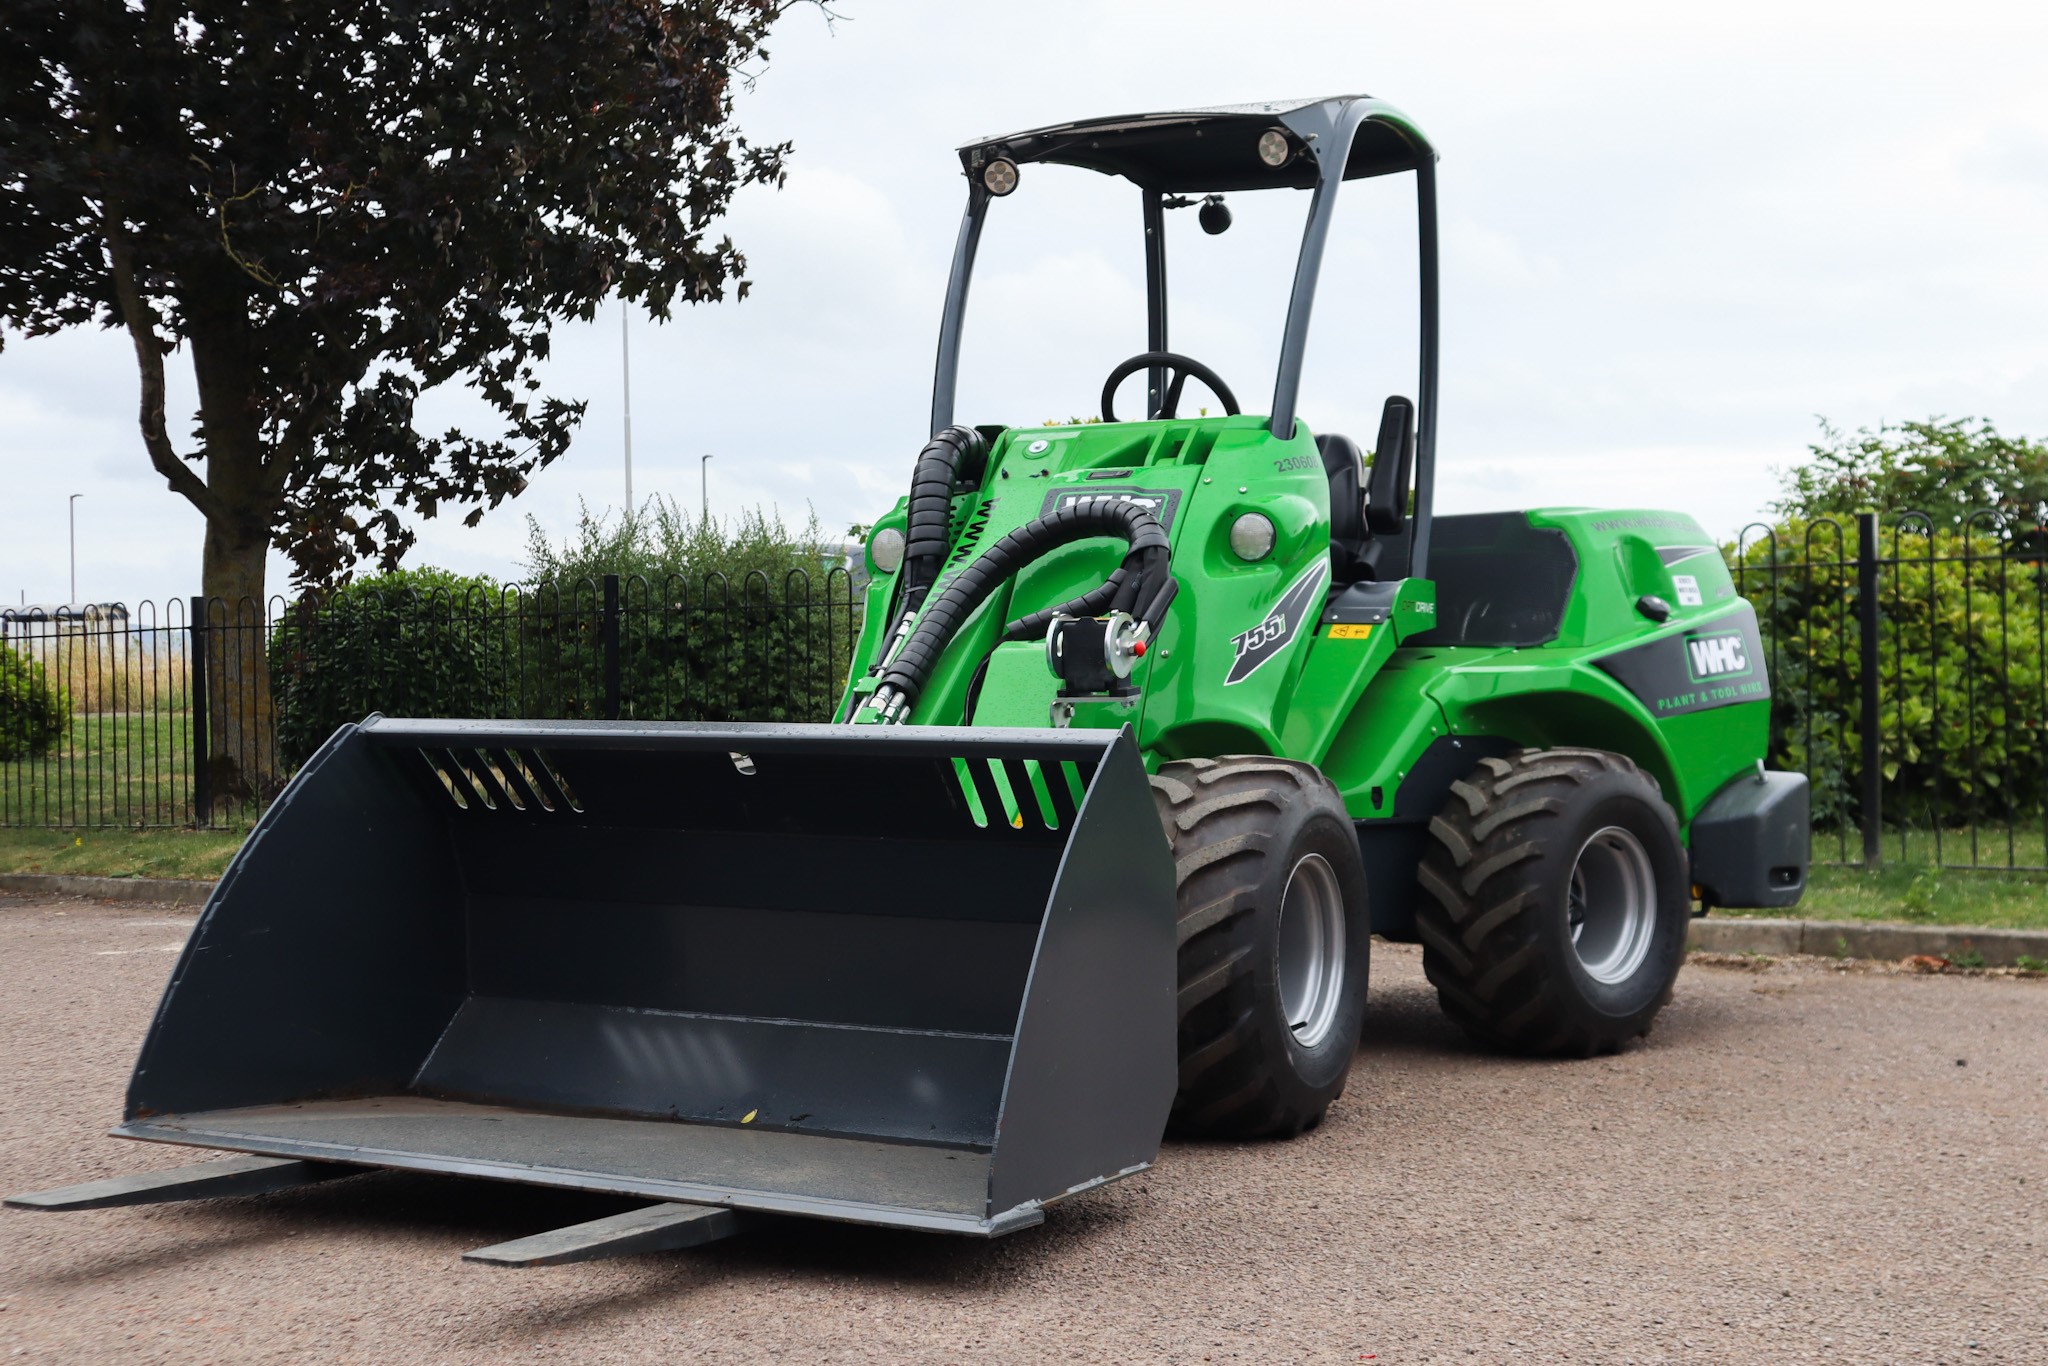 Avant 1 whc hire multi function compact loader